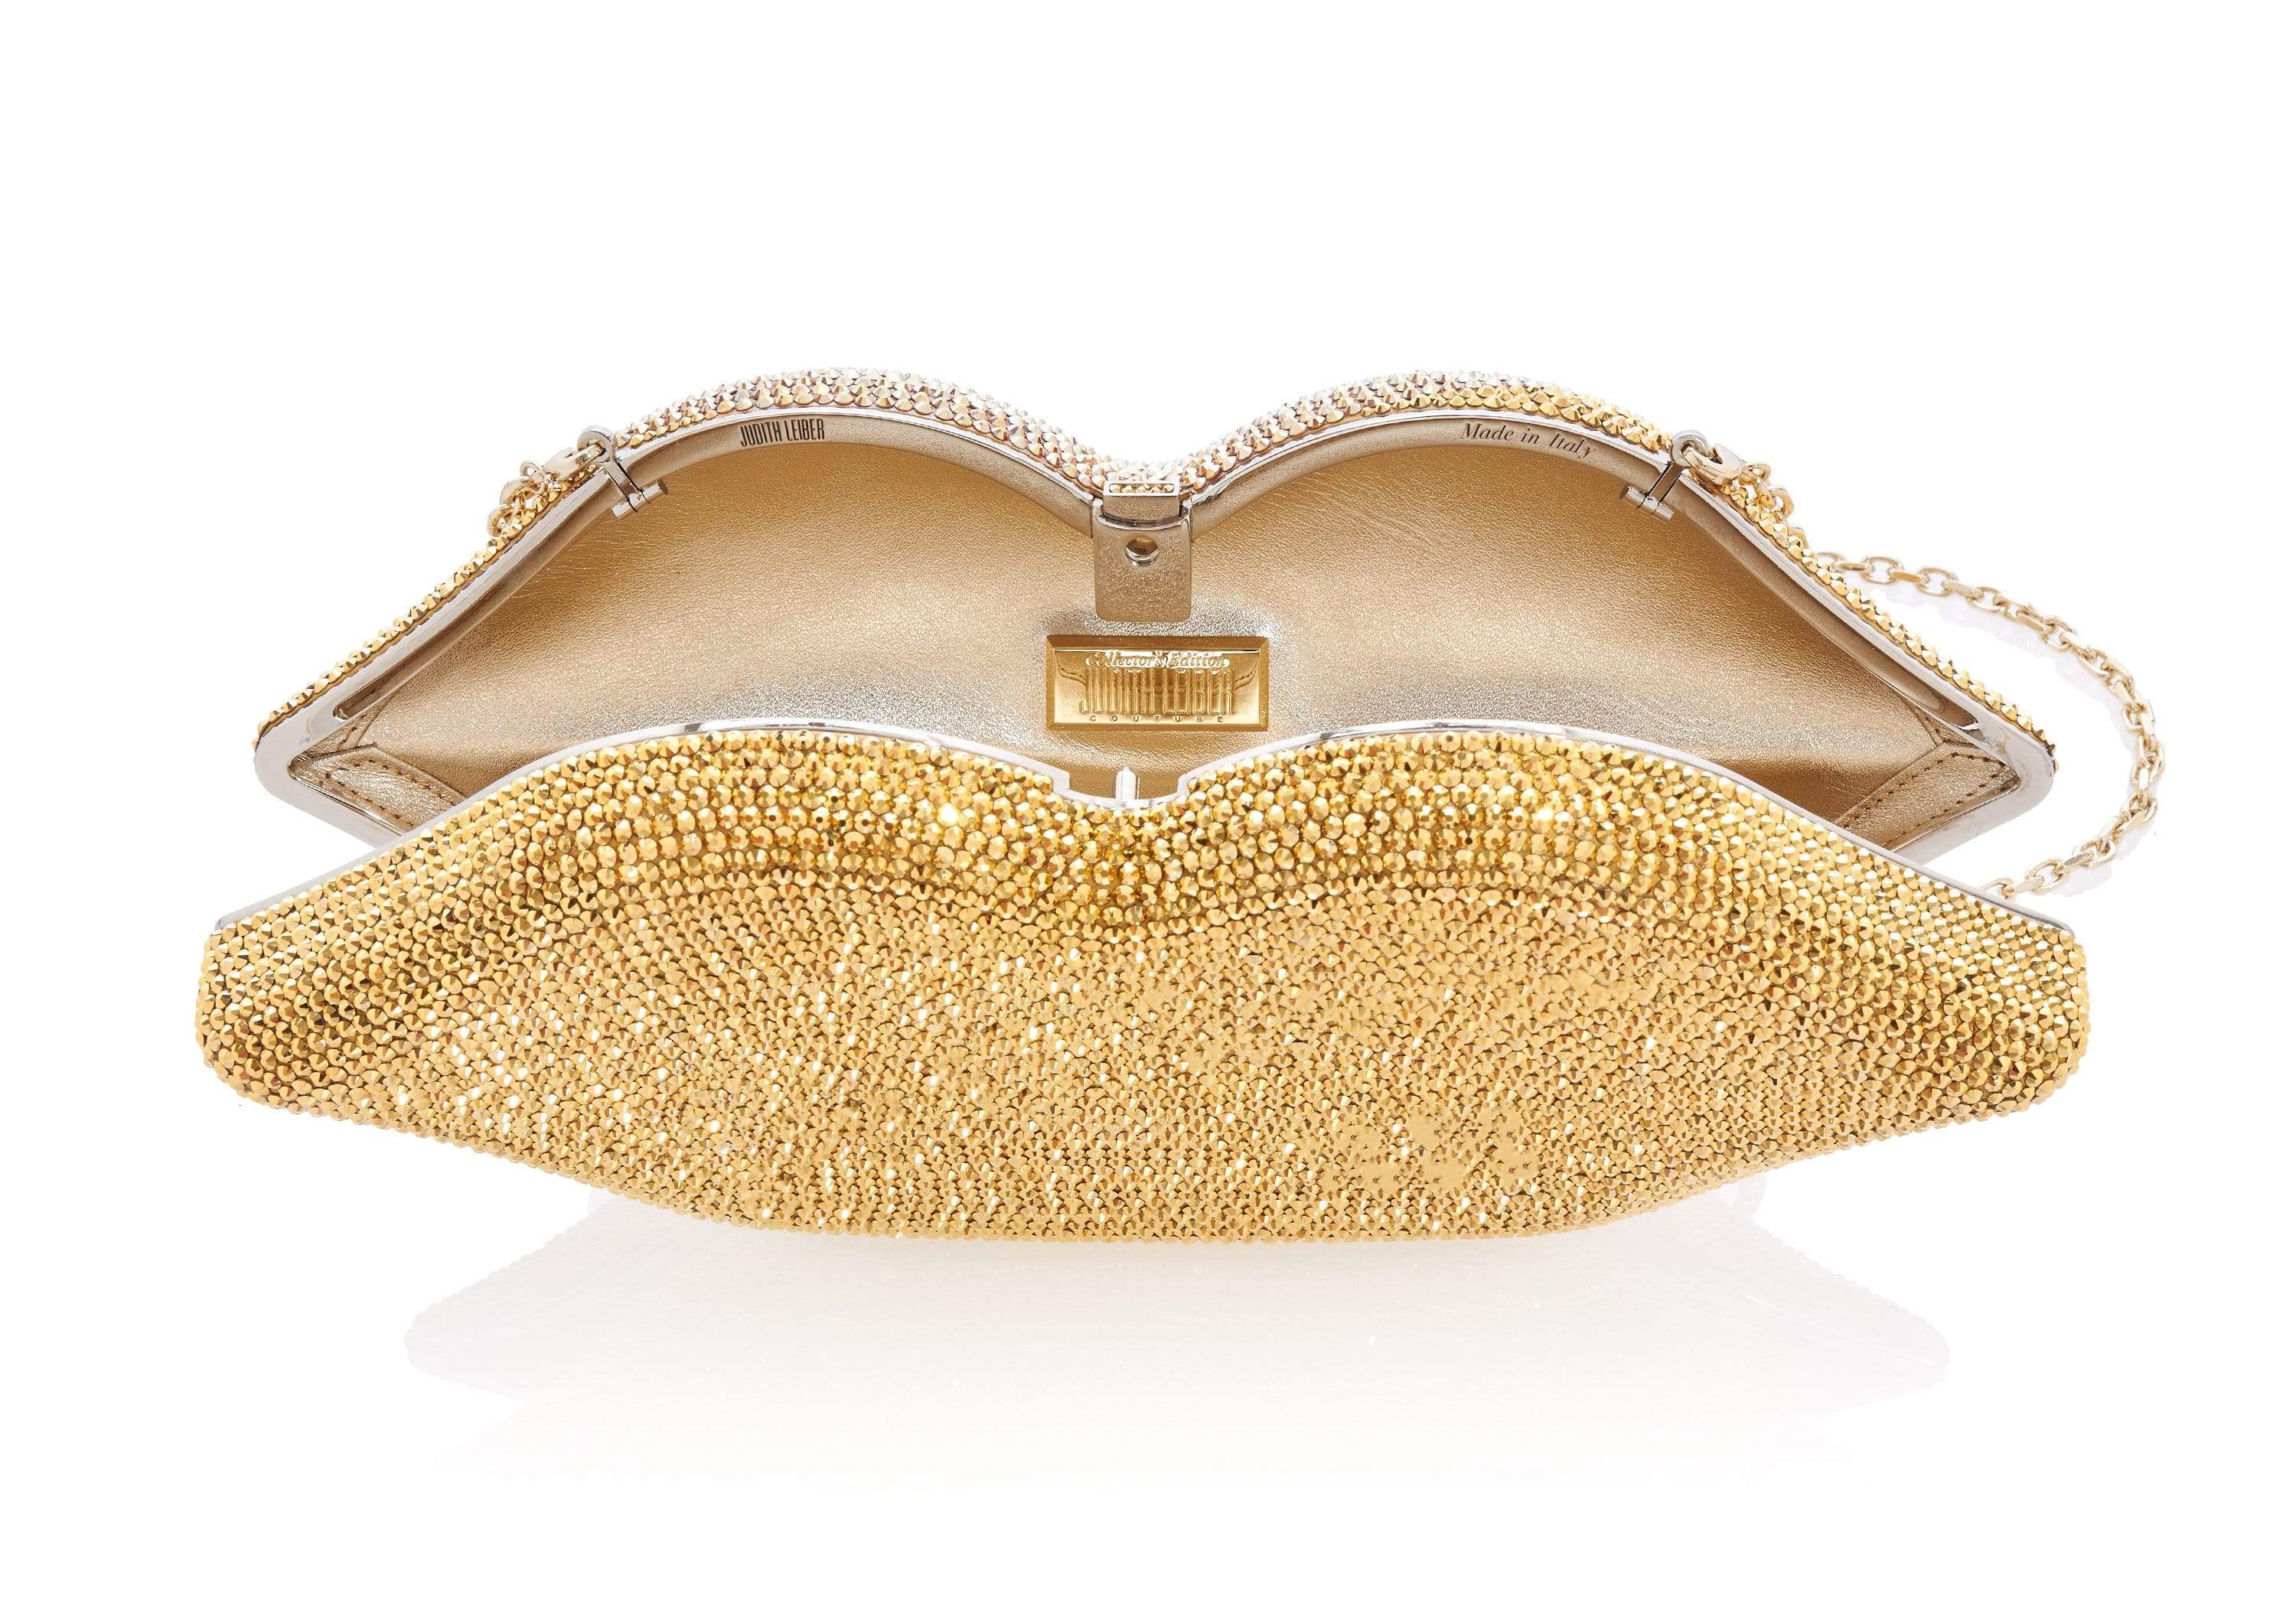 Judith Leiber Couture Seductress Crystal Lipstick Clutch Bag